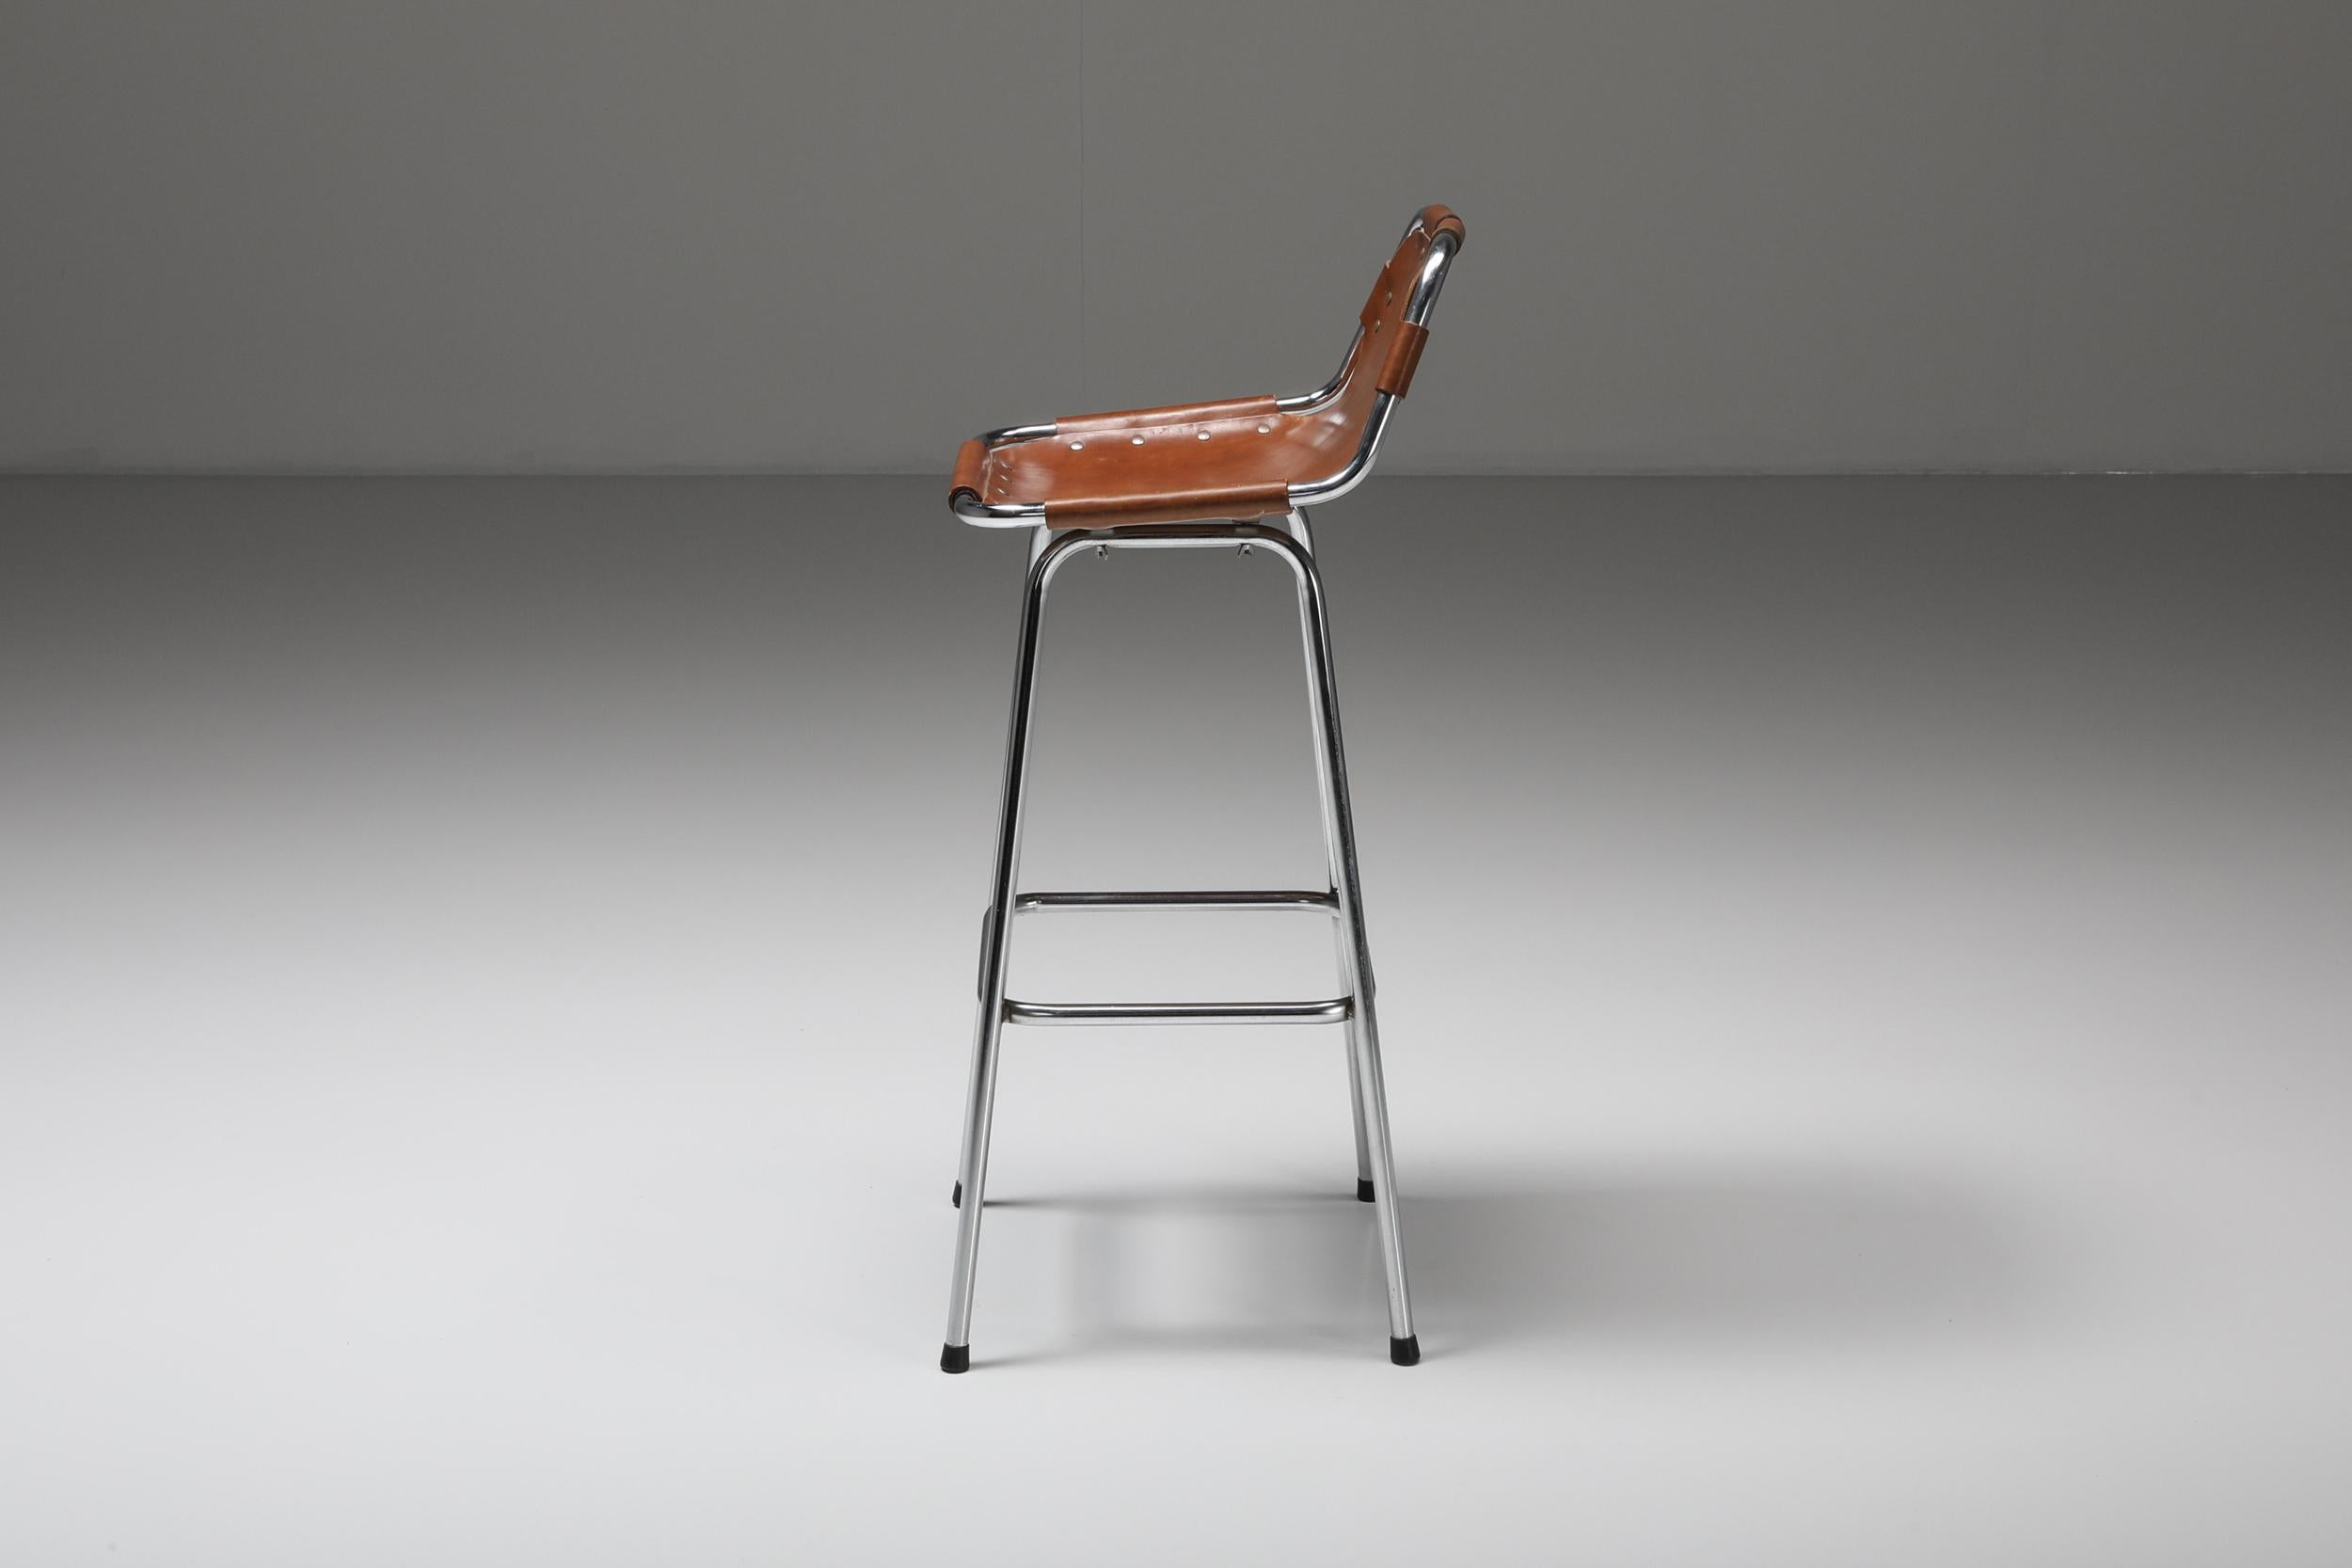 French High Bar Stool by Charlotte Perriand for the Les Arcs Ski Resort